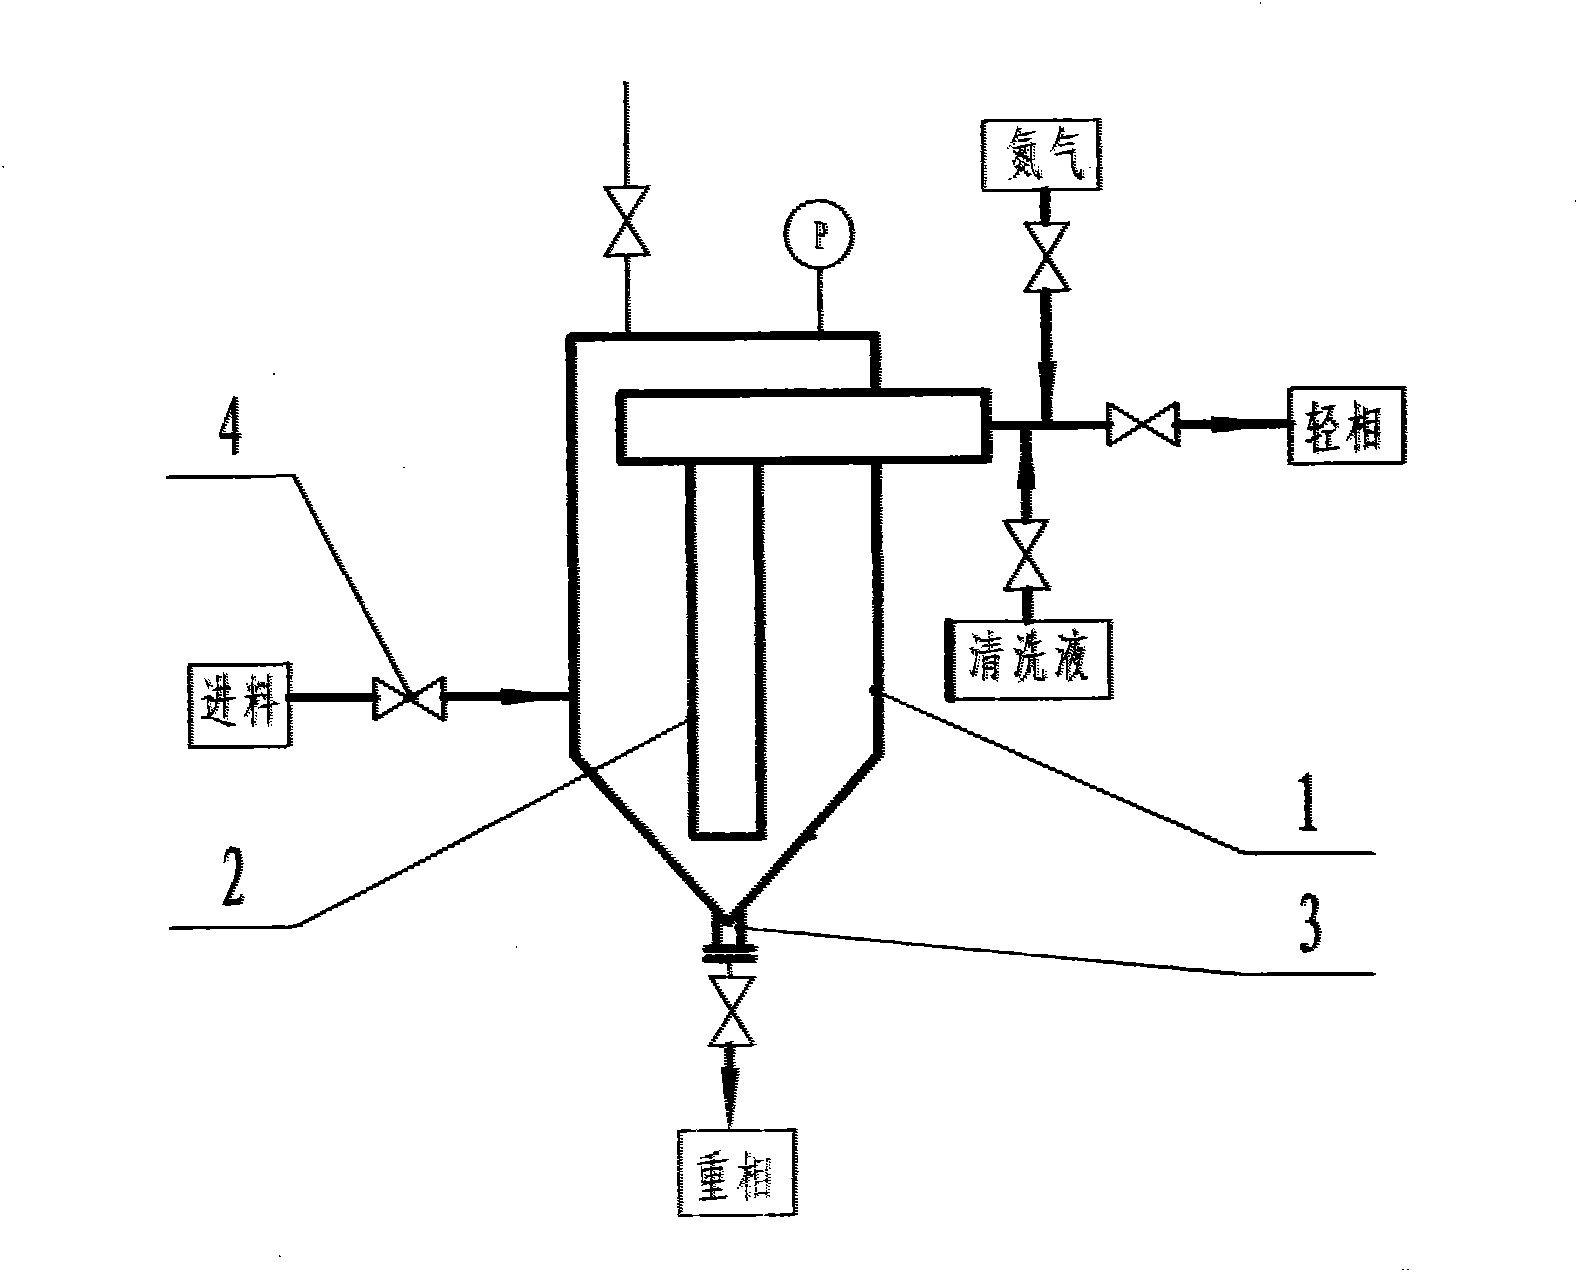 Method and equipment for separating cyclohexanecarboxylic acid slurry